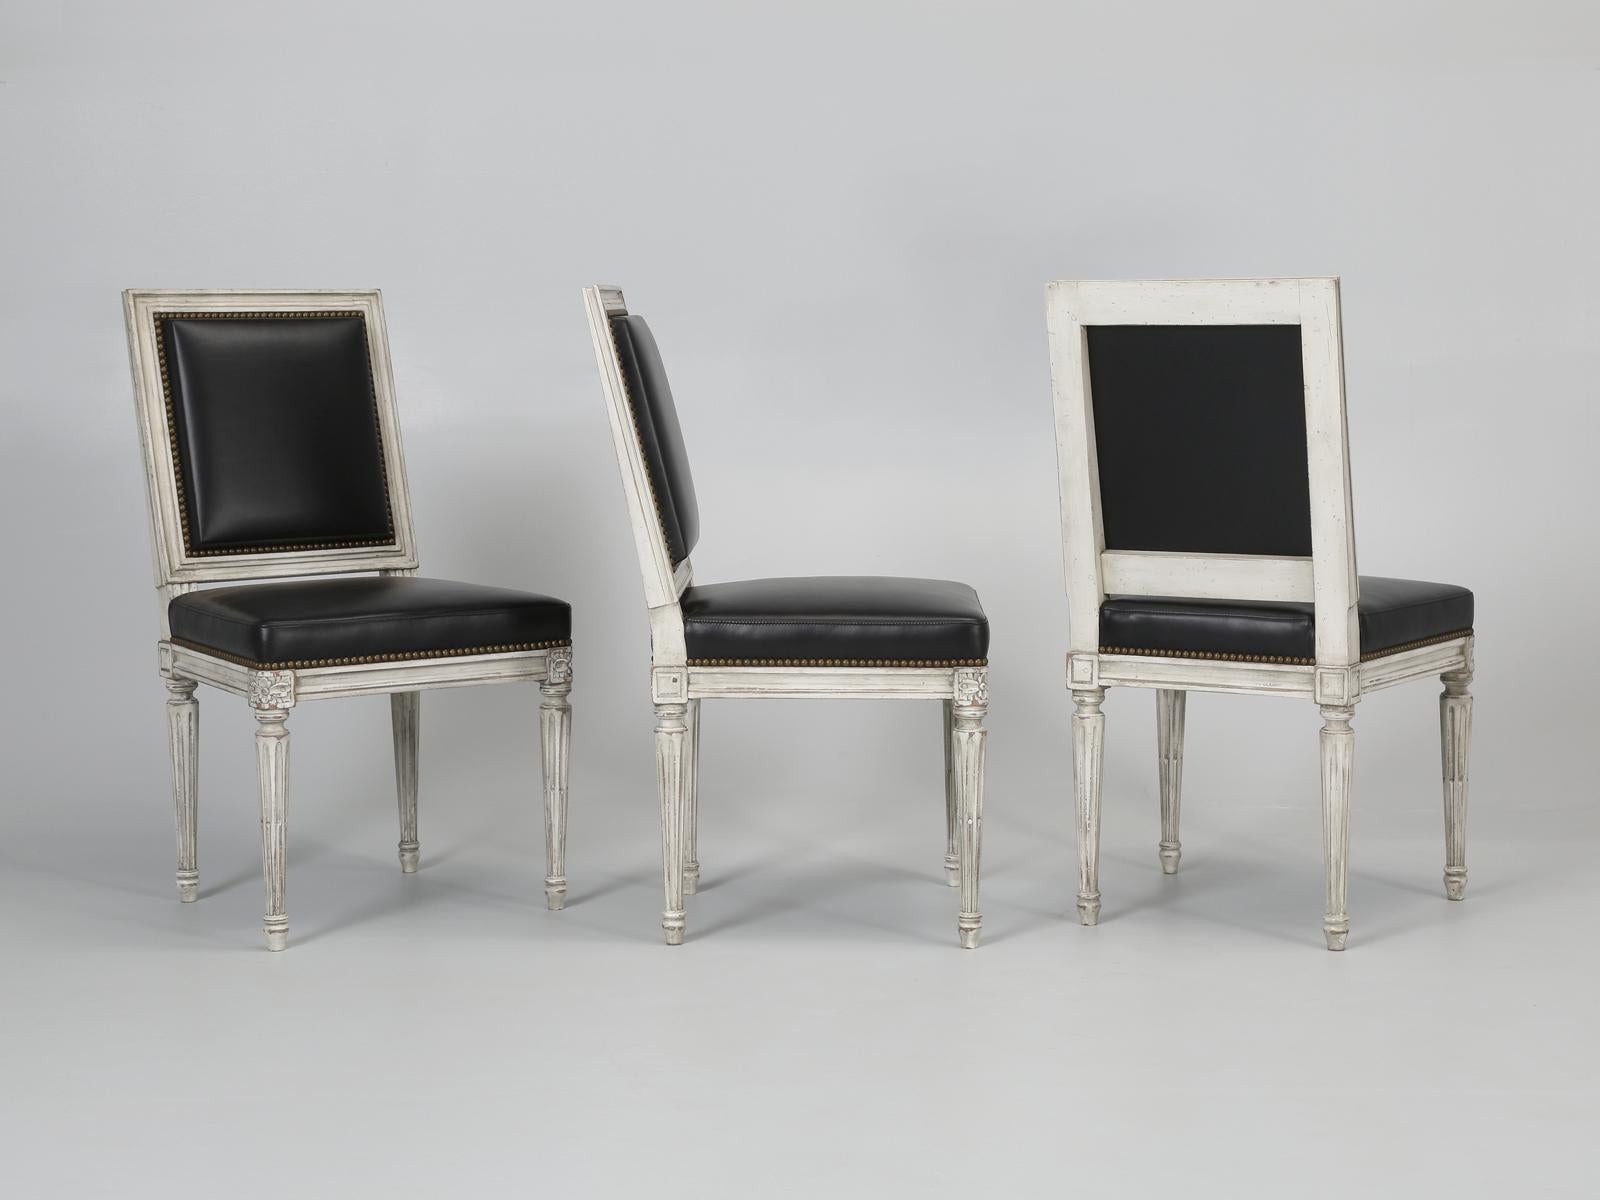 Hand-Crafted French Louis XVI Style Dining Chairs set of (8) in Black Leather, Antique Finish For Sale